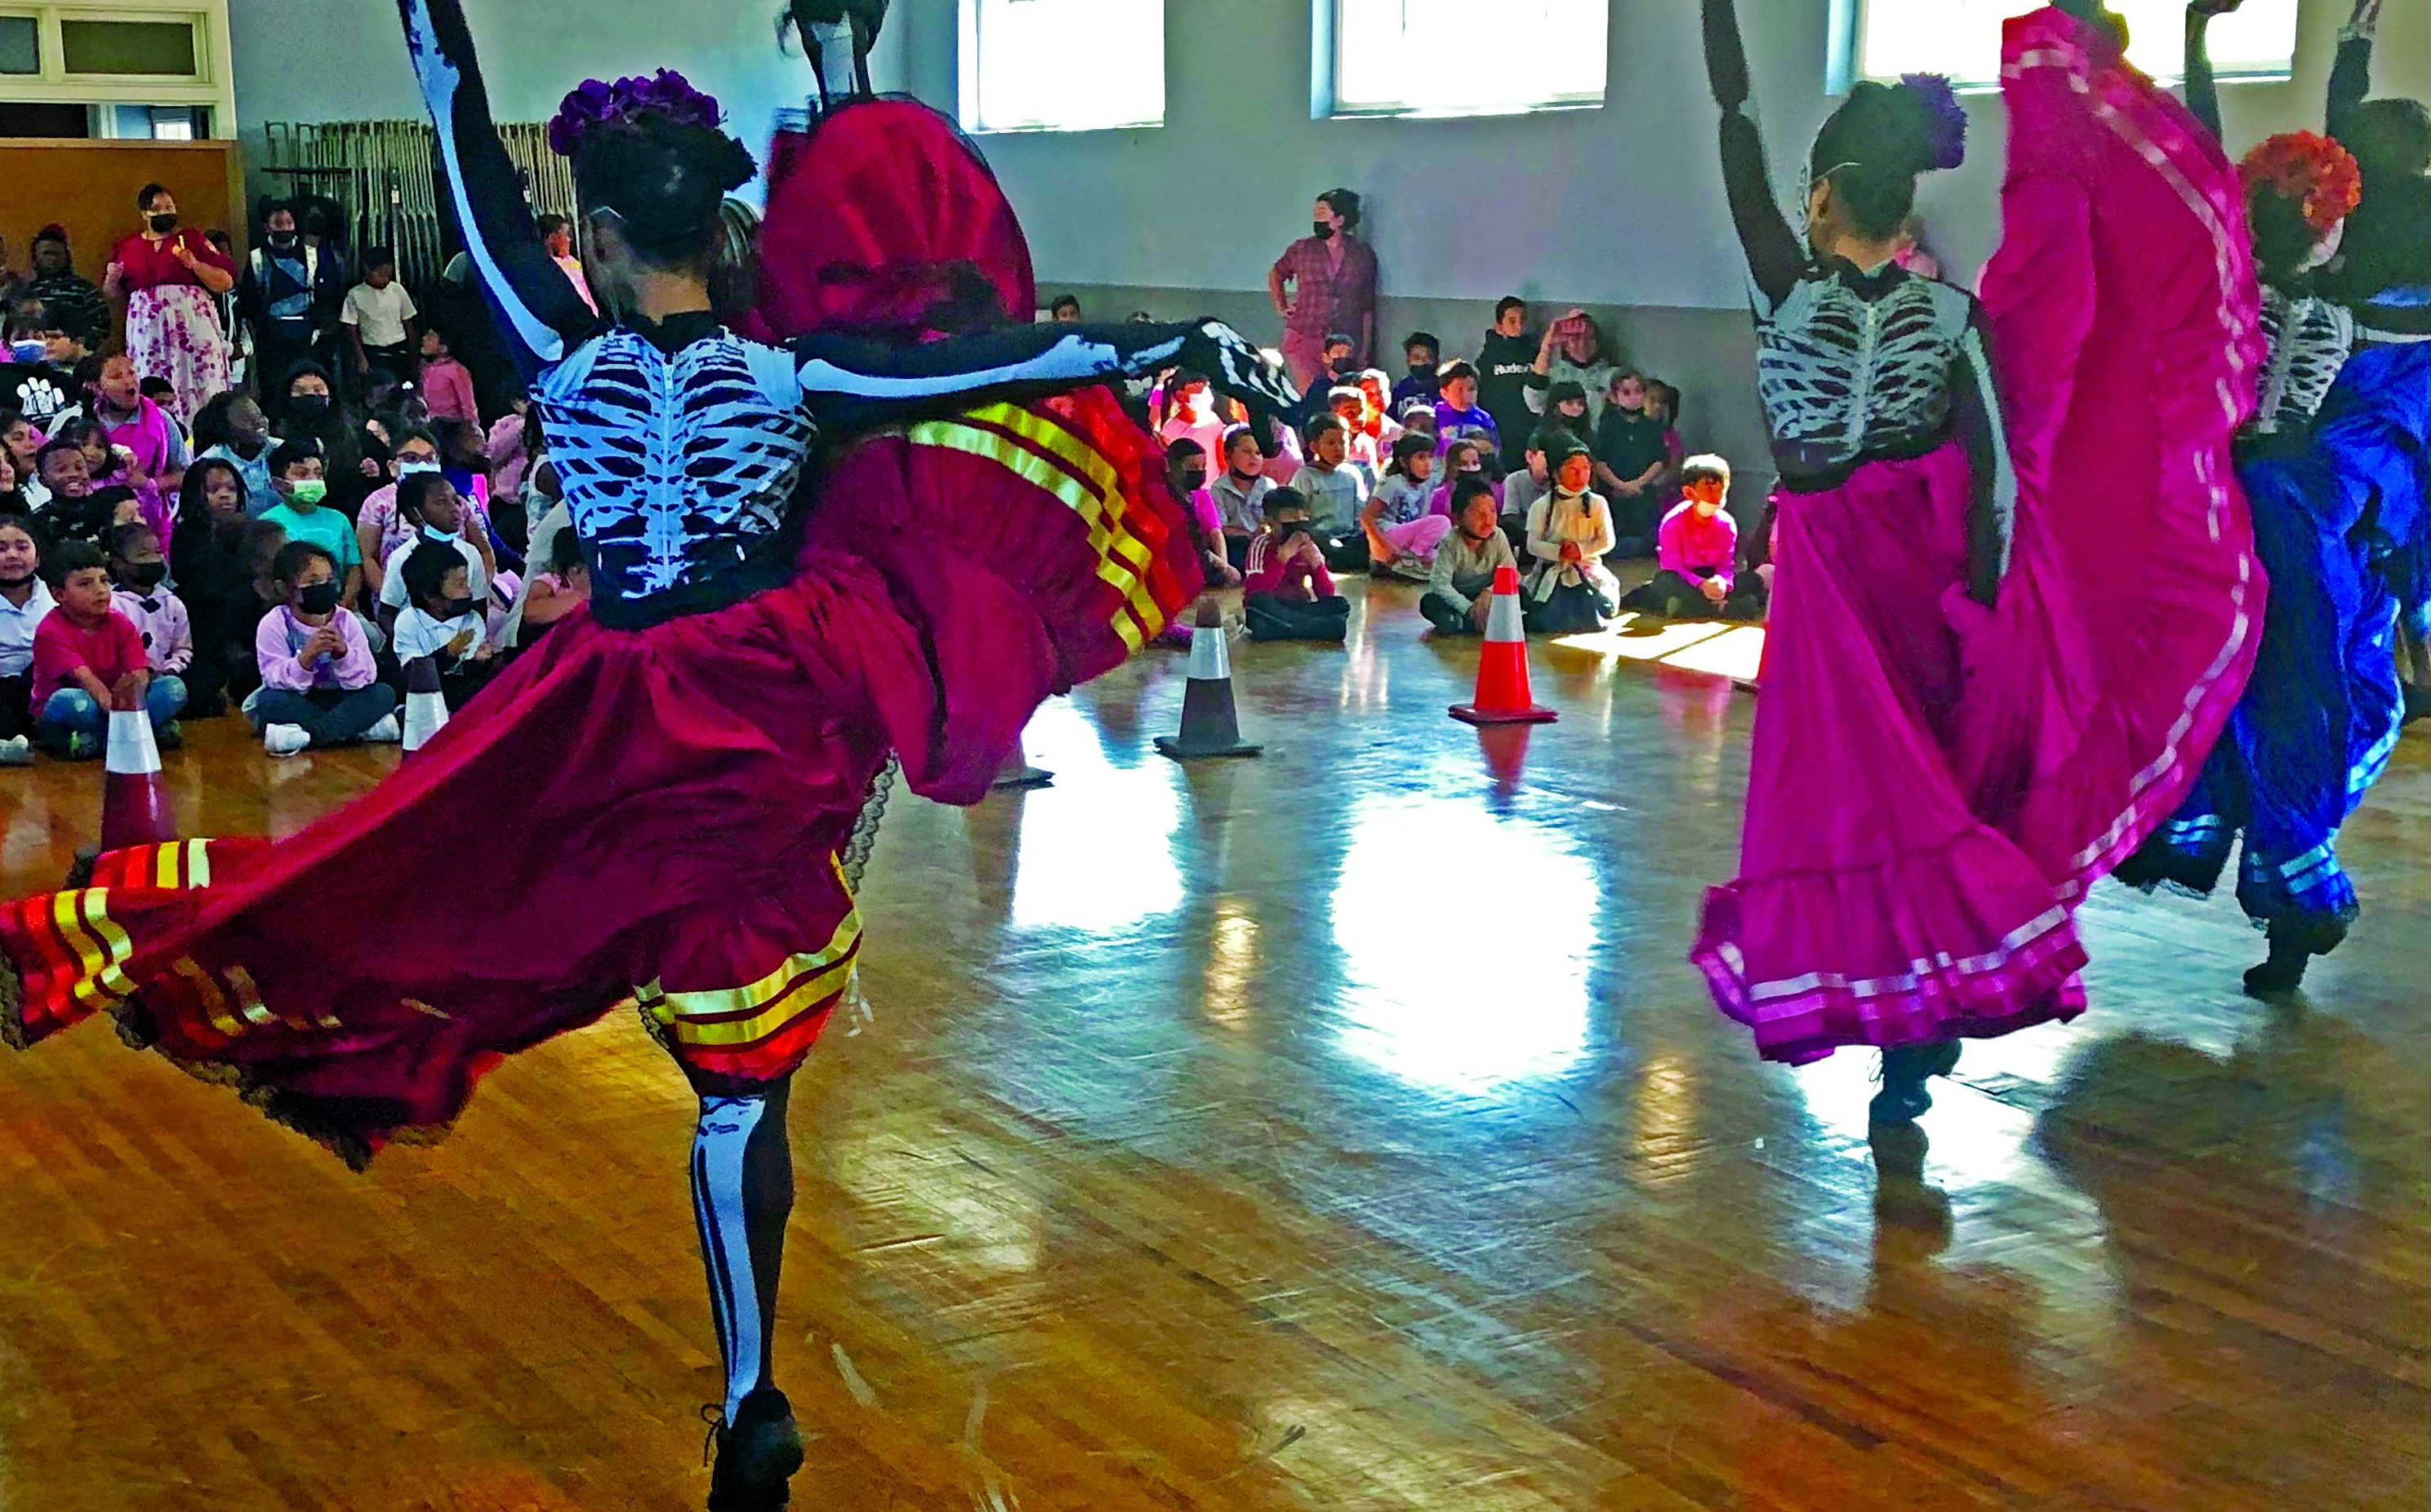 Female dancers, wearing leotards deocrated with a skeleton and colorful skirts, kick their right let in the air.